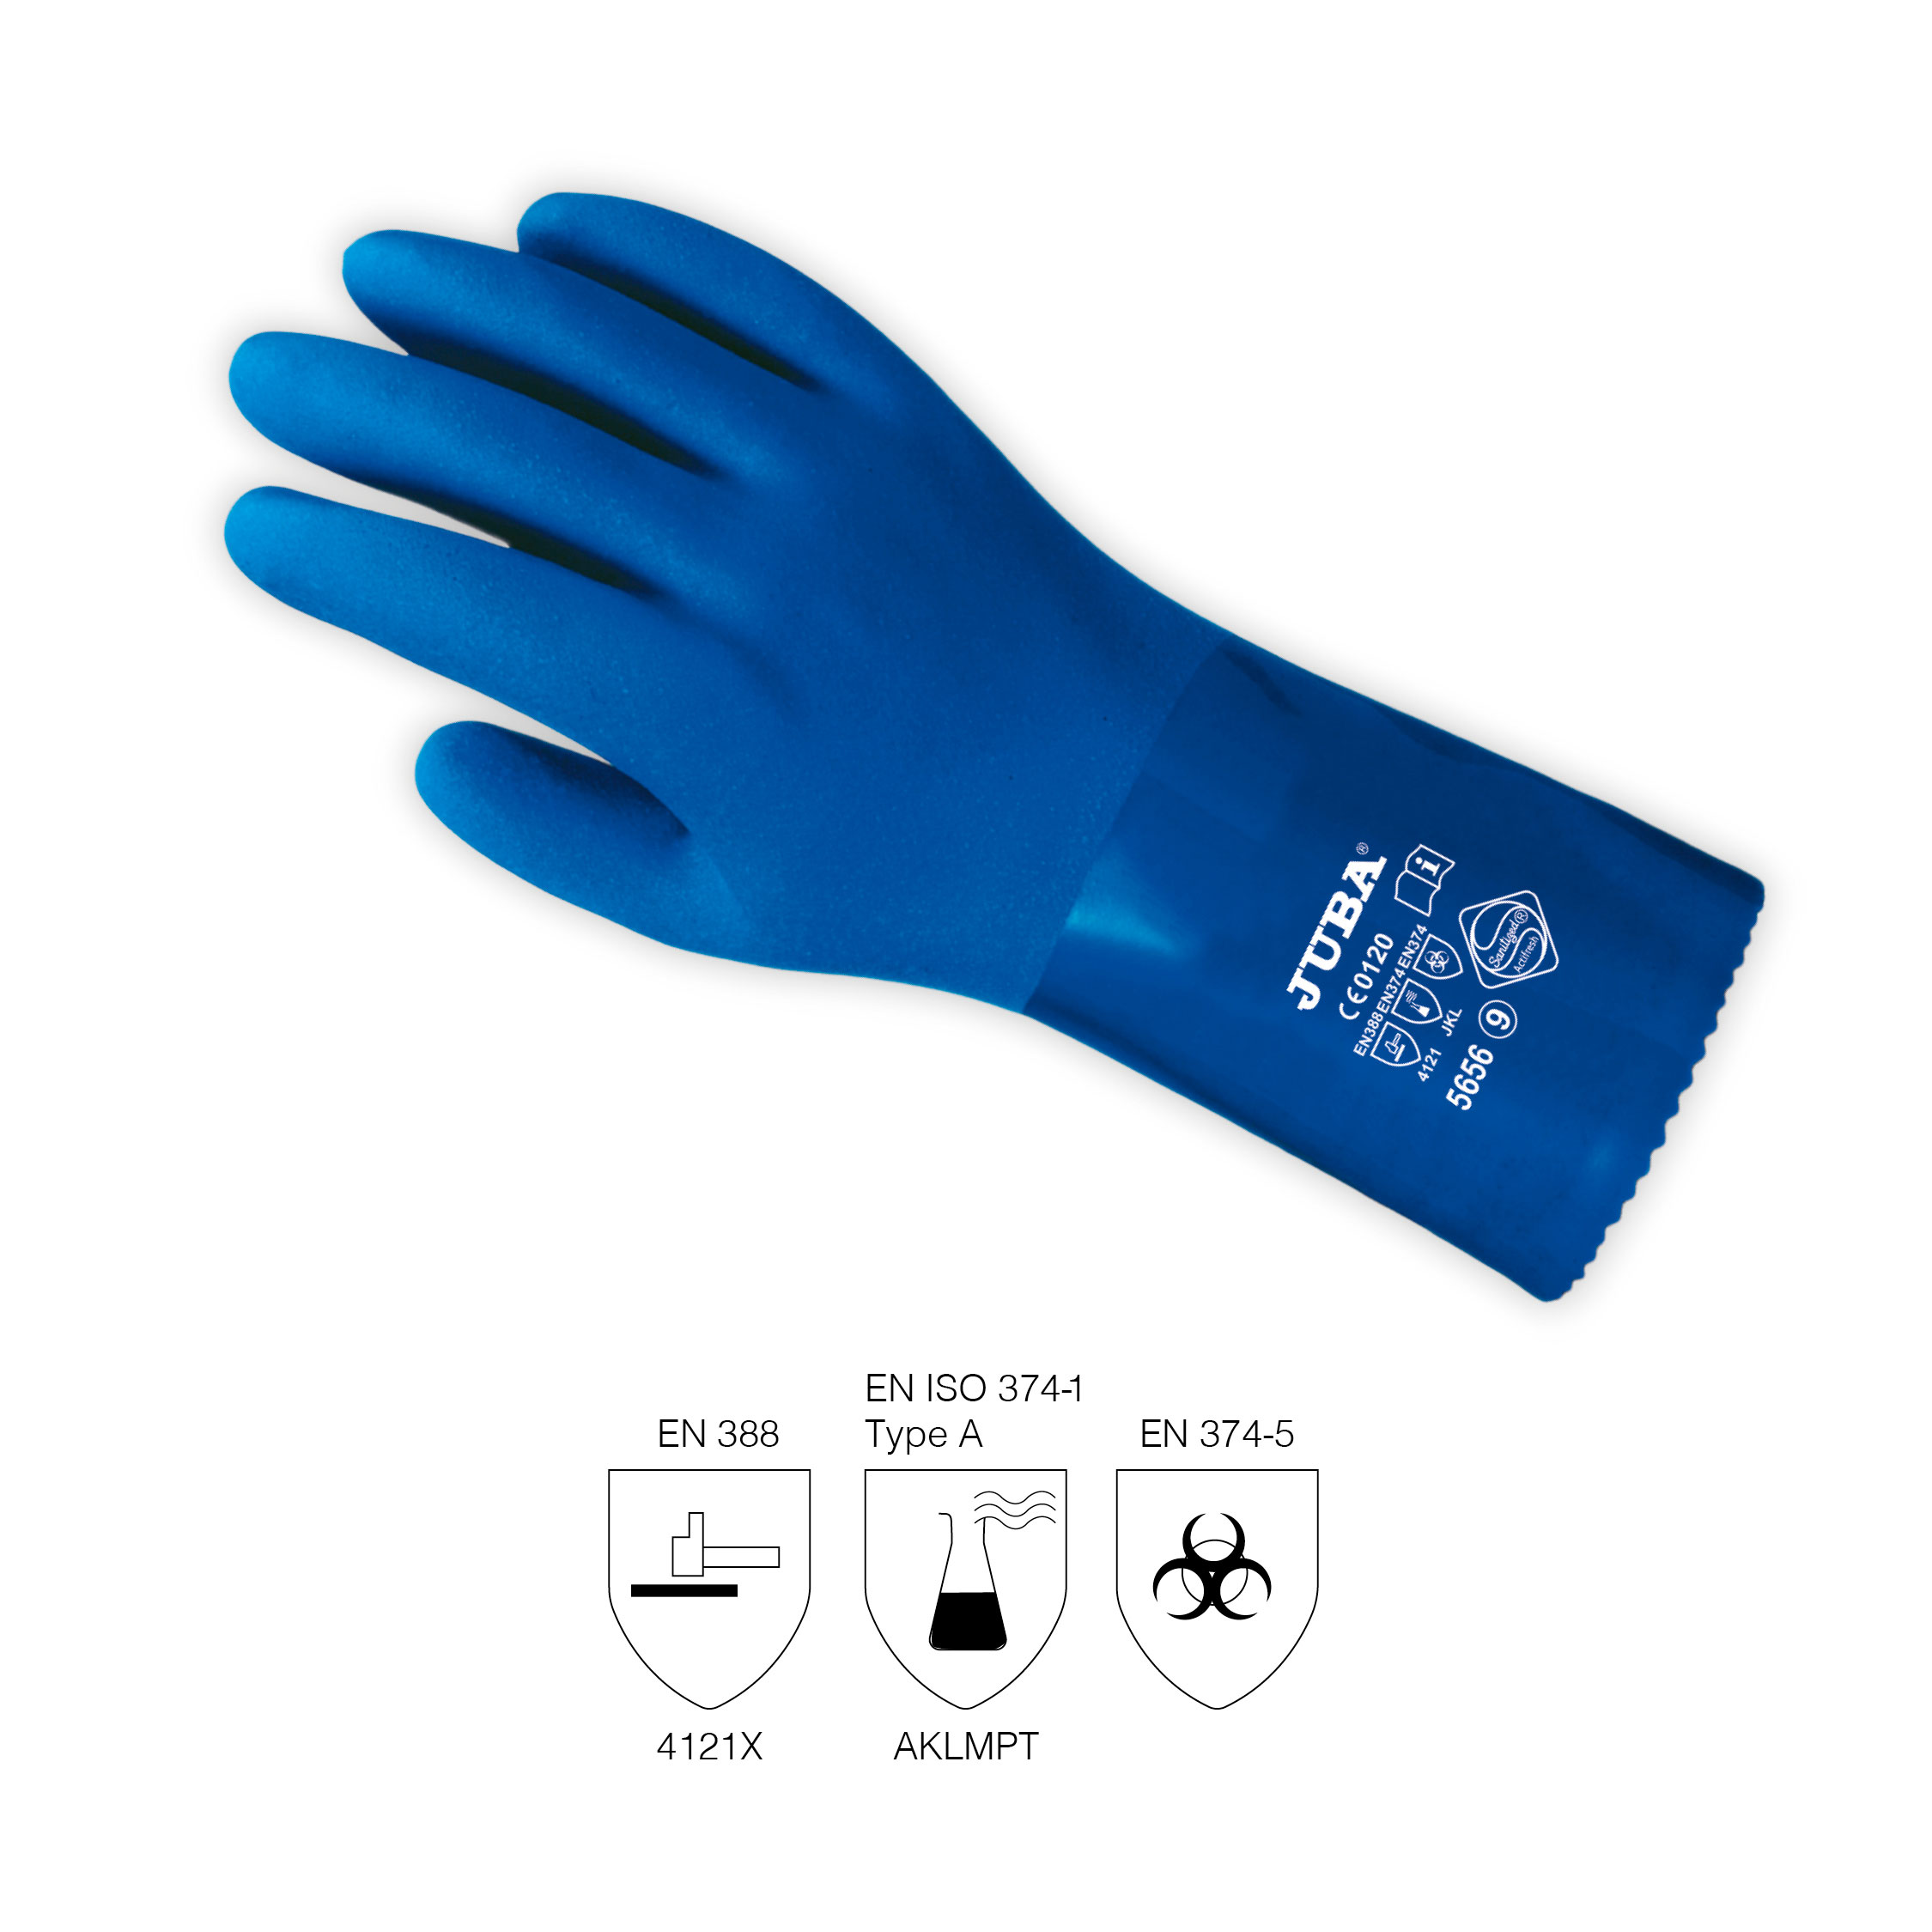 Seamless PVC glove with cotton support